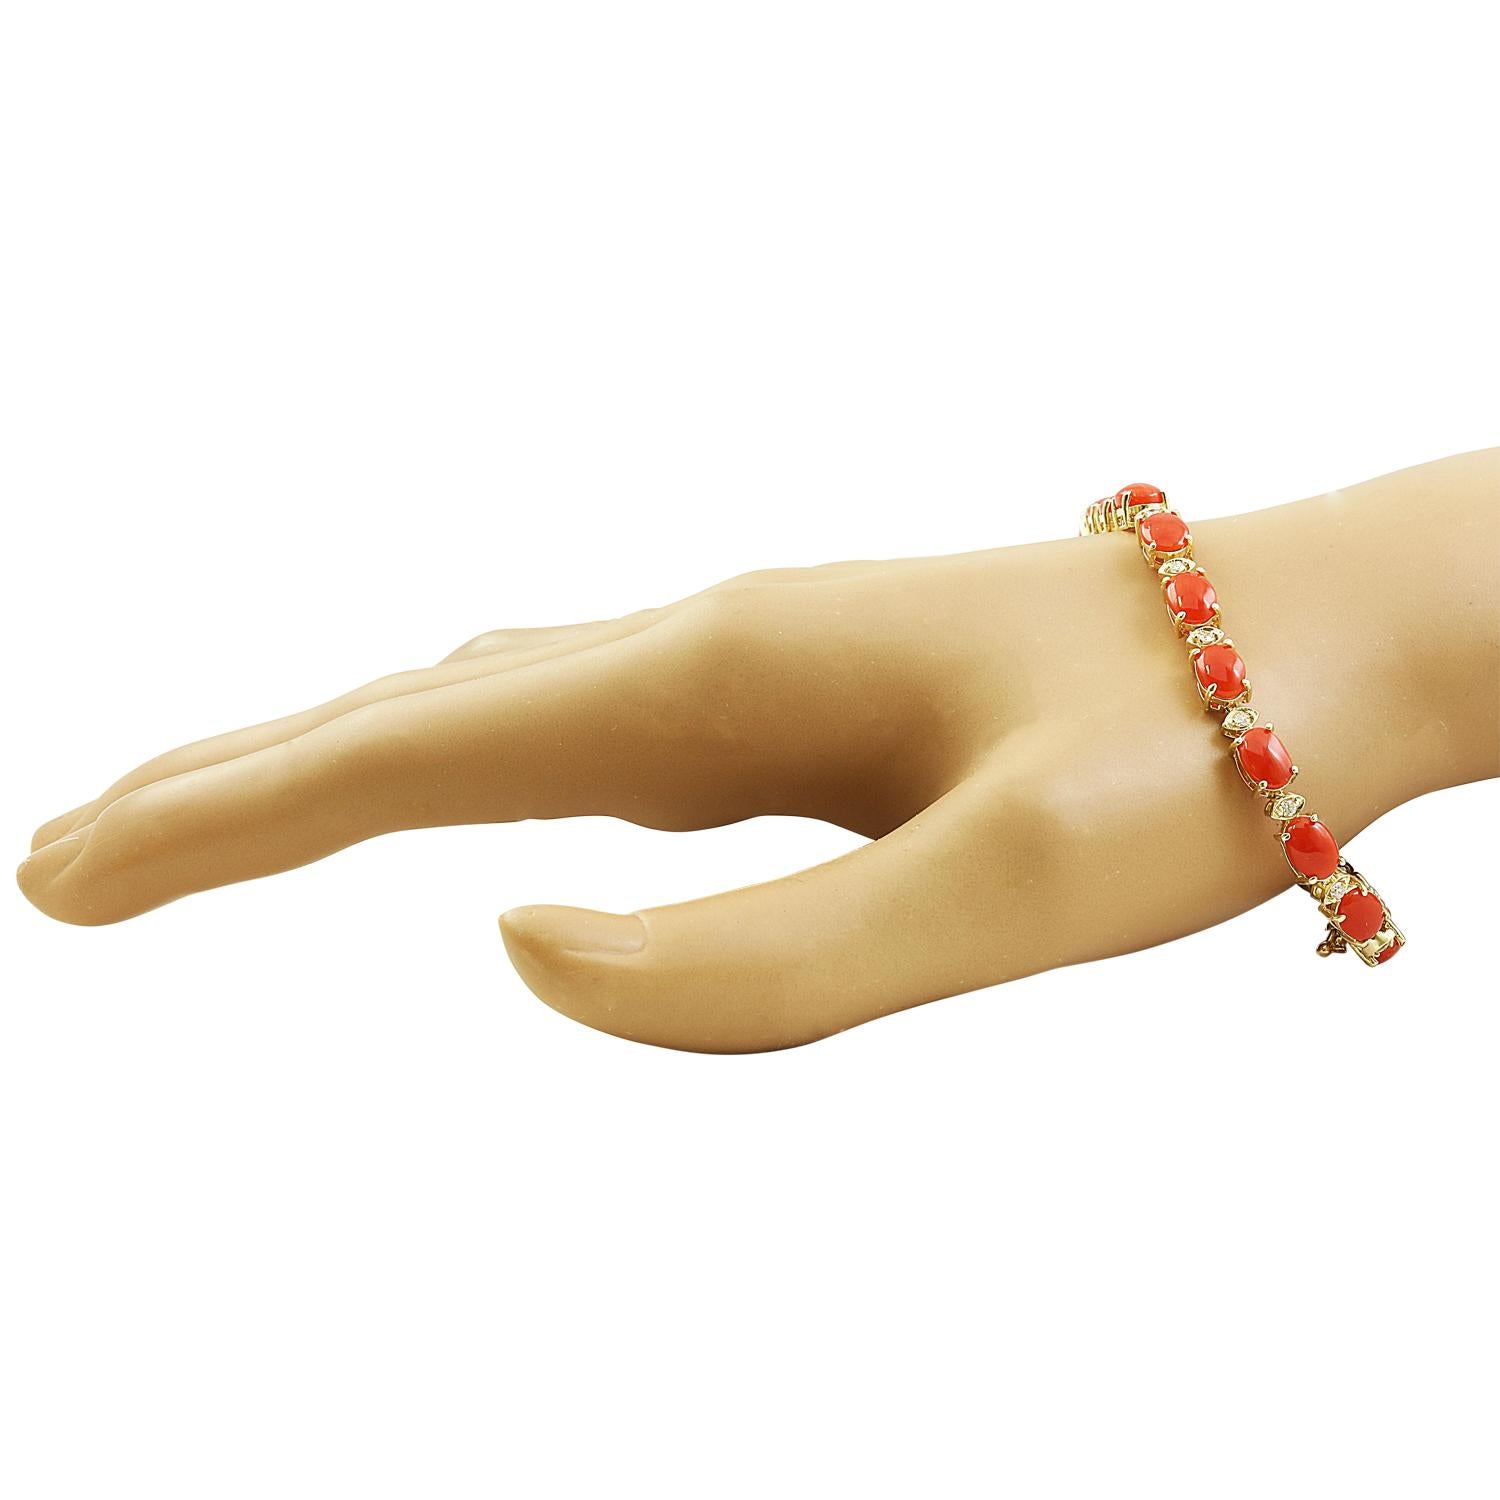 17.47 Carat Natural Coral 14 Karat Solid Yellow Gold Diamond Bracelet
Stamped: 14K 
Total Bracelet Weight: 9 Grams
Bracelet Length: 7.0 Inches 
Coral Weight: 16.72 Carat (7.00x5.00 Millimeters) 
Diamond Weight: 0.75 Carat (F-G Color, VS2-SI1 Clarity